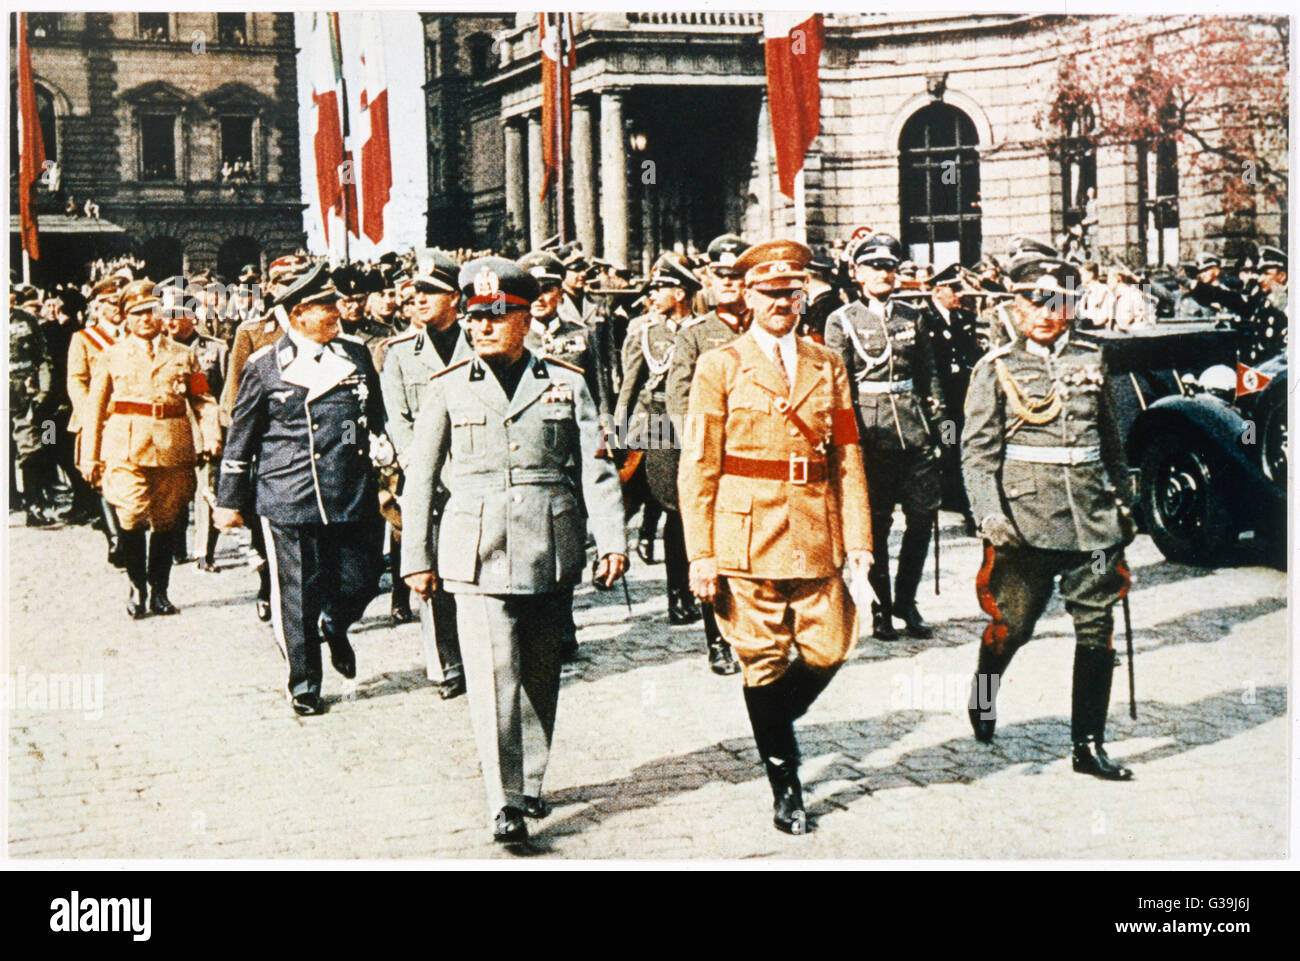 MUSSOLINI WITH HITLER  The Italian dictator walking  with Adolf Hitler in Munich.       Date: 1883 - 1945 Stock Photo